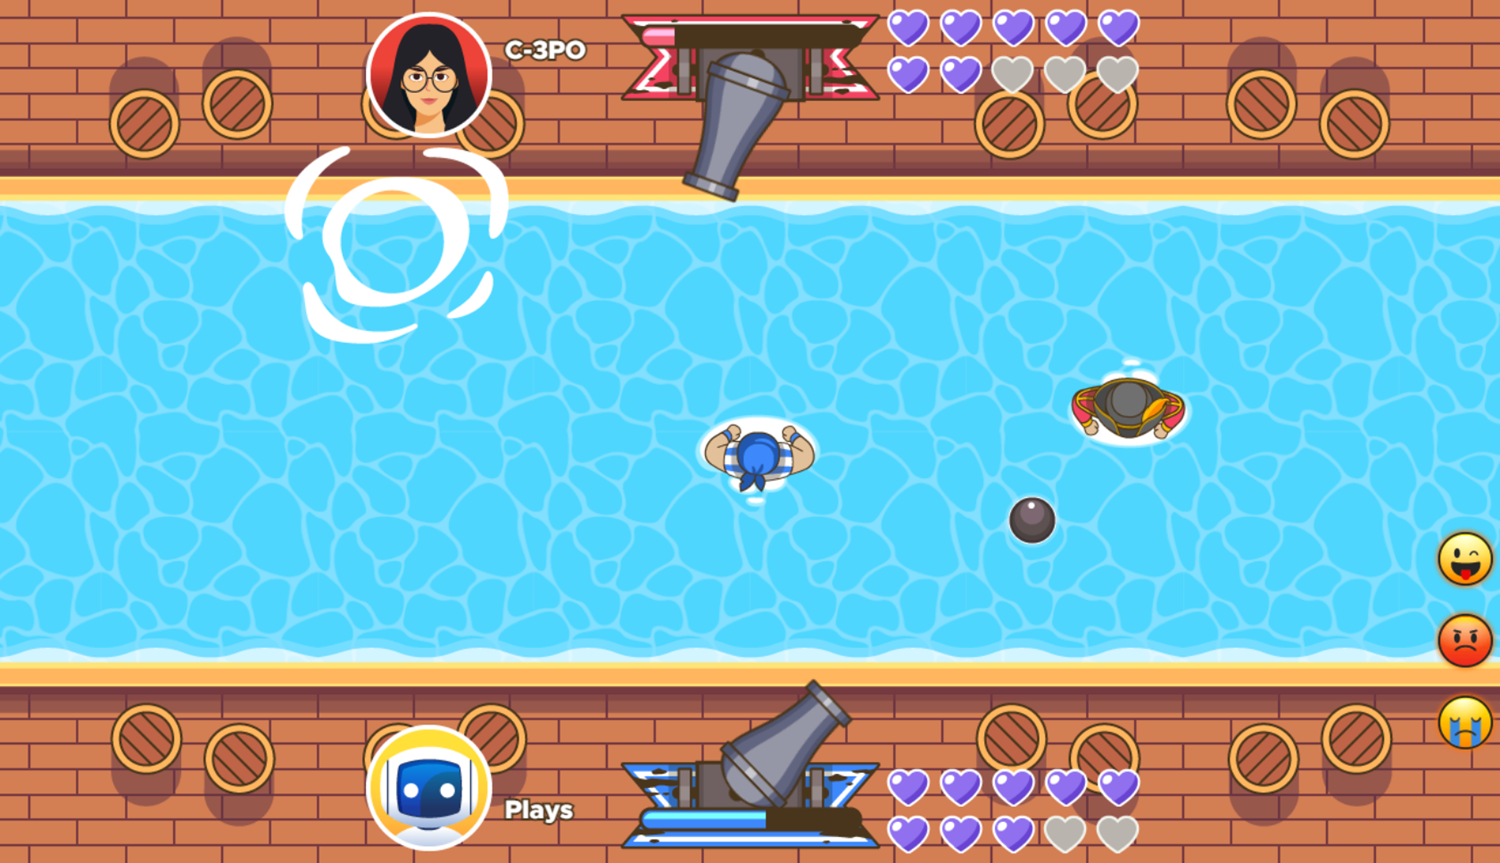 Board The Ship With Buddies Game Play Screenshot.